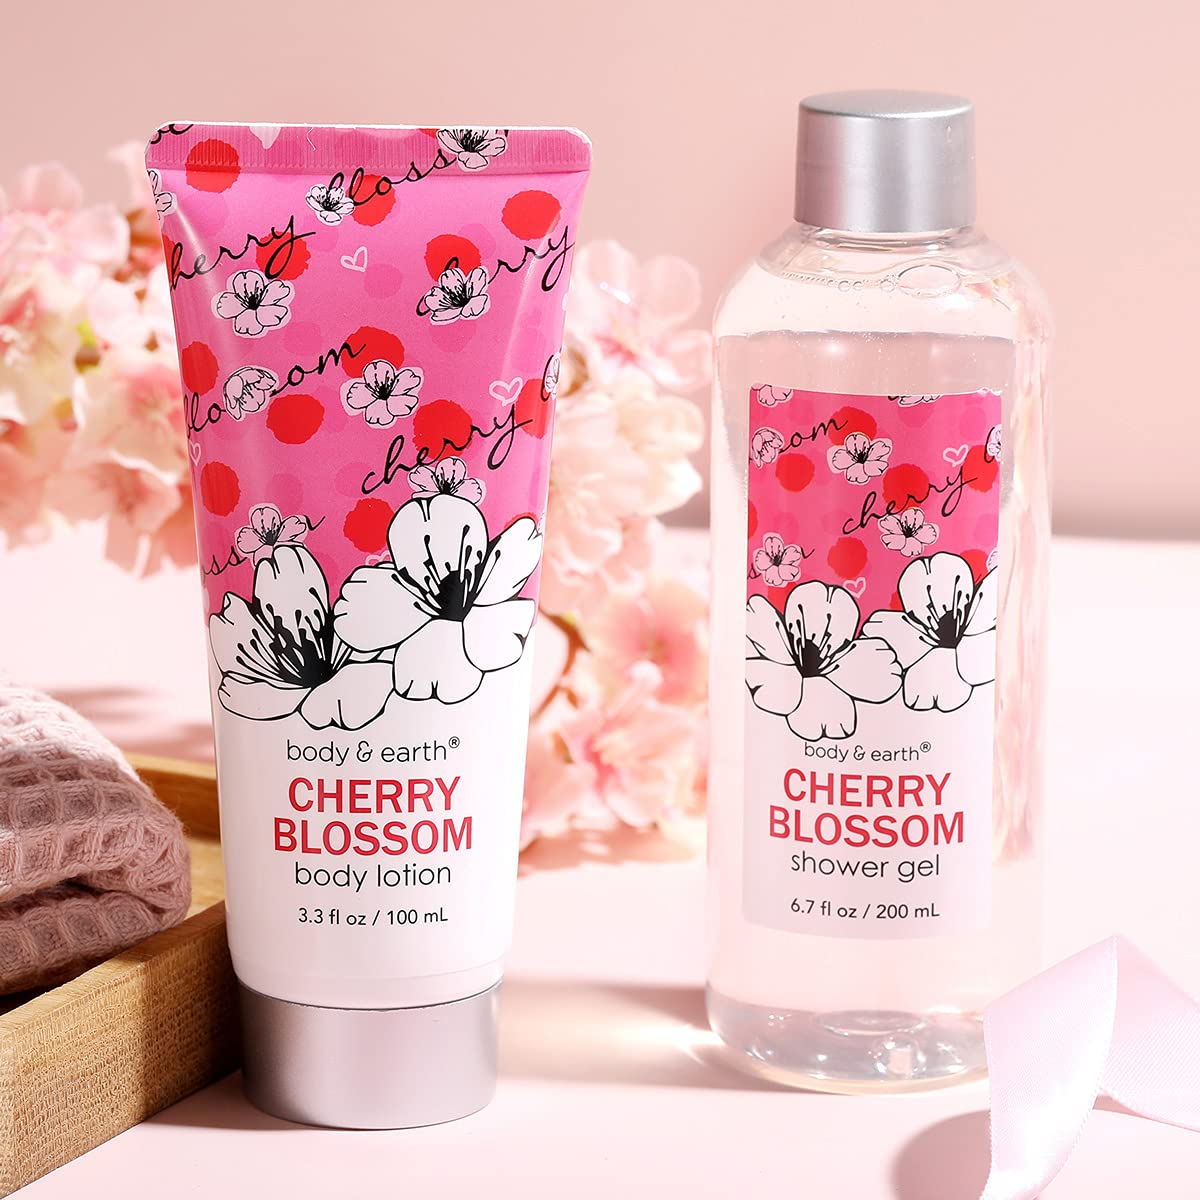 Bath and Body Gift Set for Women - Cherry Blossom Scent with Double-Layer Spa Gift Box, 5 Piece Home Spa Set Includes Shower Gel, Body Scrub, Body Lotion, Hand Soap, Rose Flower, Bath Set Gift for Her